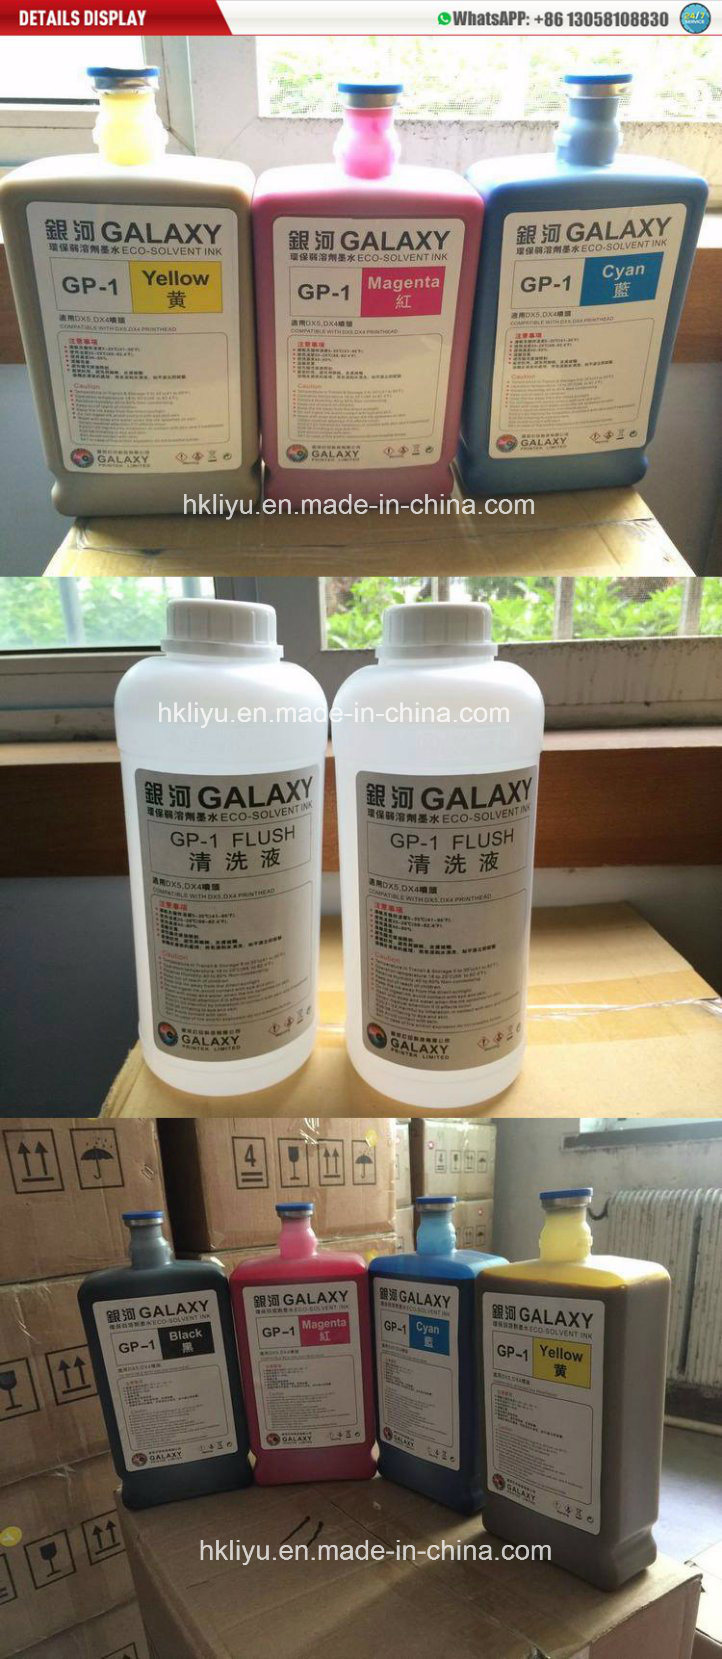 Wholesale/Factory Price Phaeton/Galaxy Gp-1 Eco Solvent Ink for Galaxy Phaeton Roland Printer with No Smell Gp-1 Ink for Epson Dx5